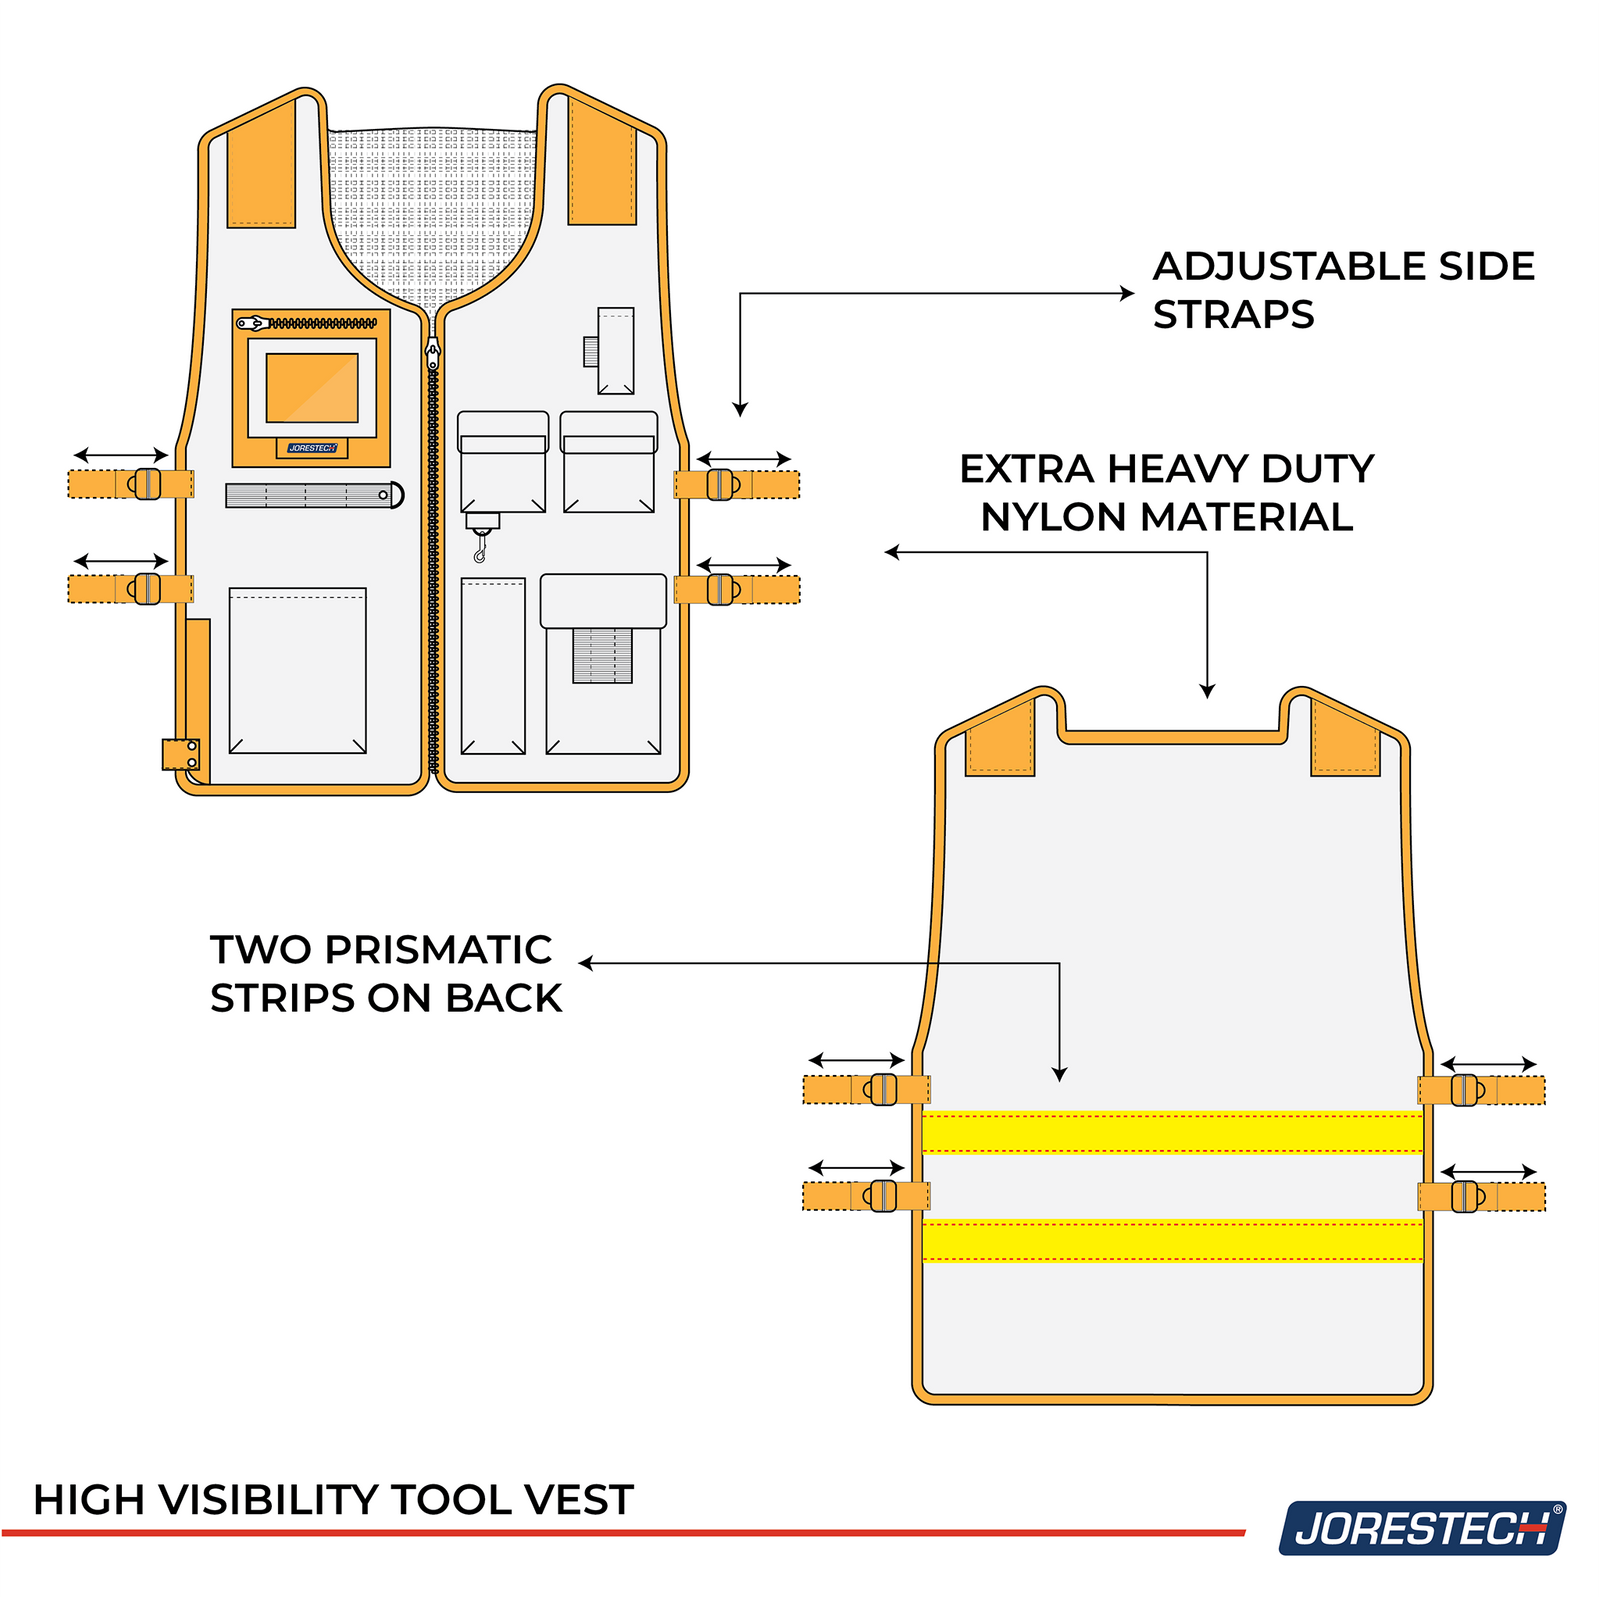 Diagram to show all 4 adjustable straps and the 2 prismatic strips on the back side of the JORESTECH tool vest